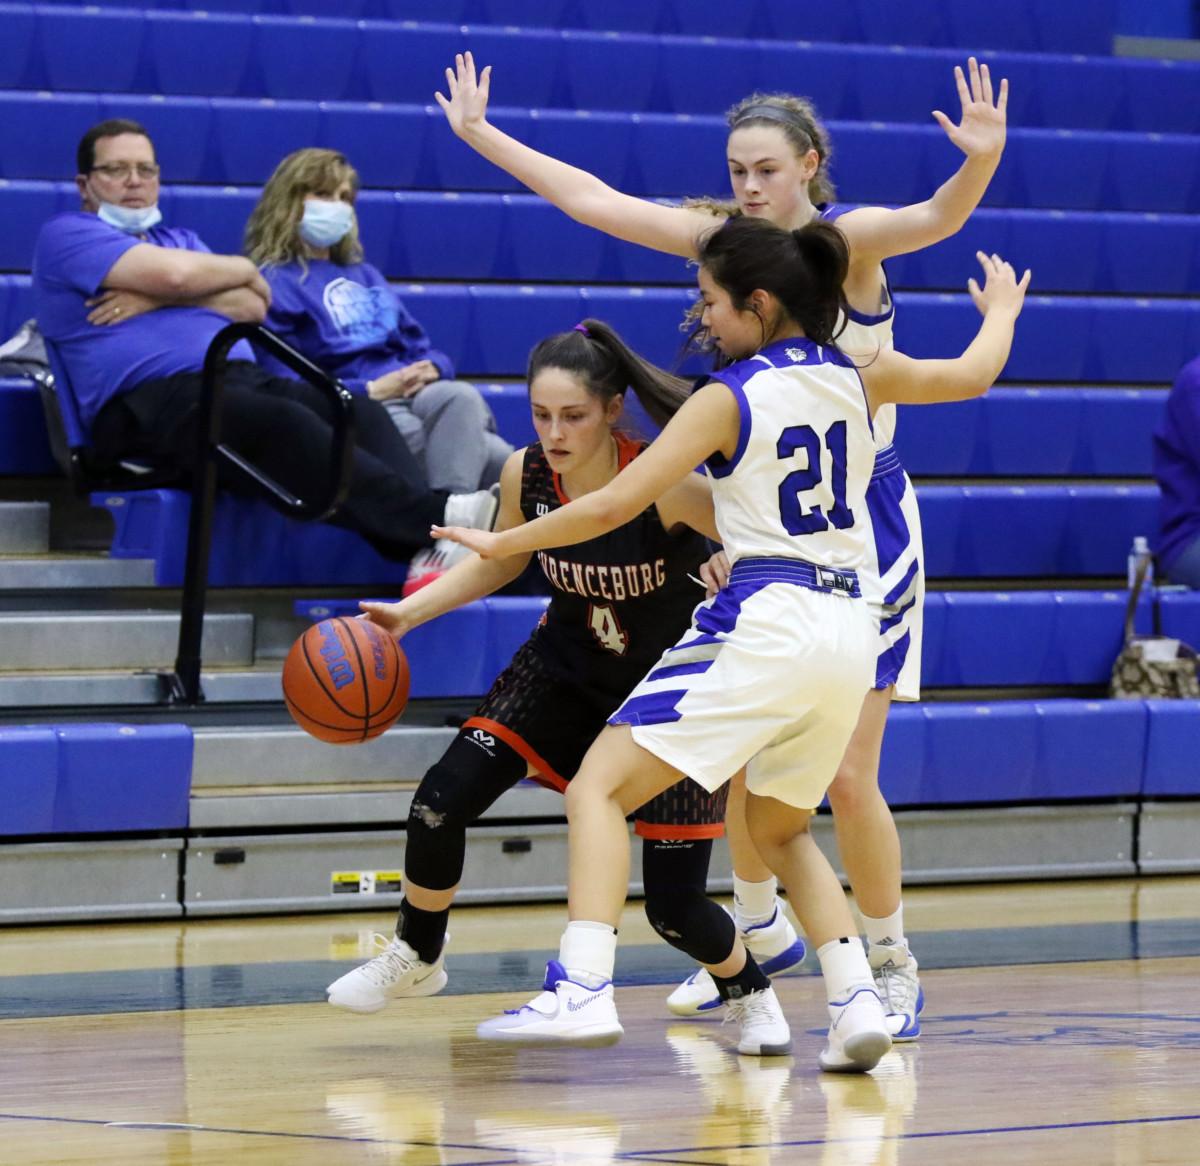 Columbus North's Kanon Matsuno and Madison White guard Lawrenceburg's Holly Knippenberg at Columbus North, Saturday, Jan. 16, 2021. Paige Grider for The Republic